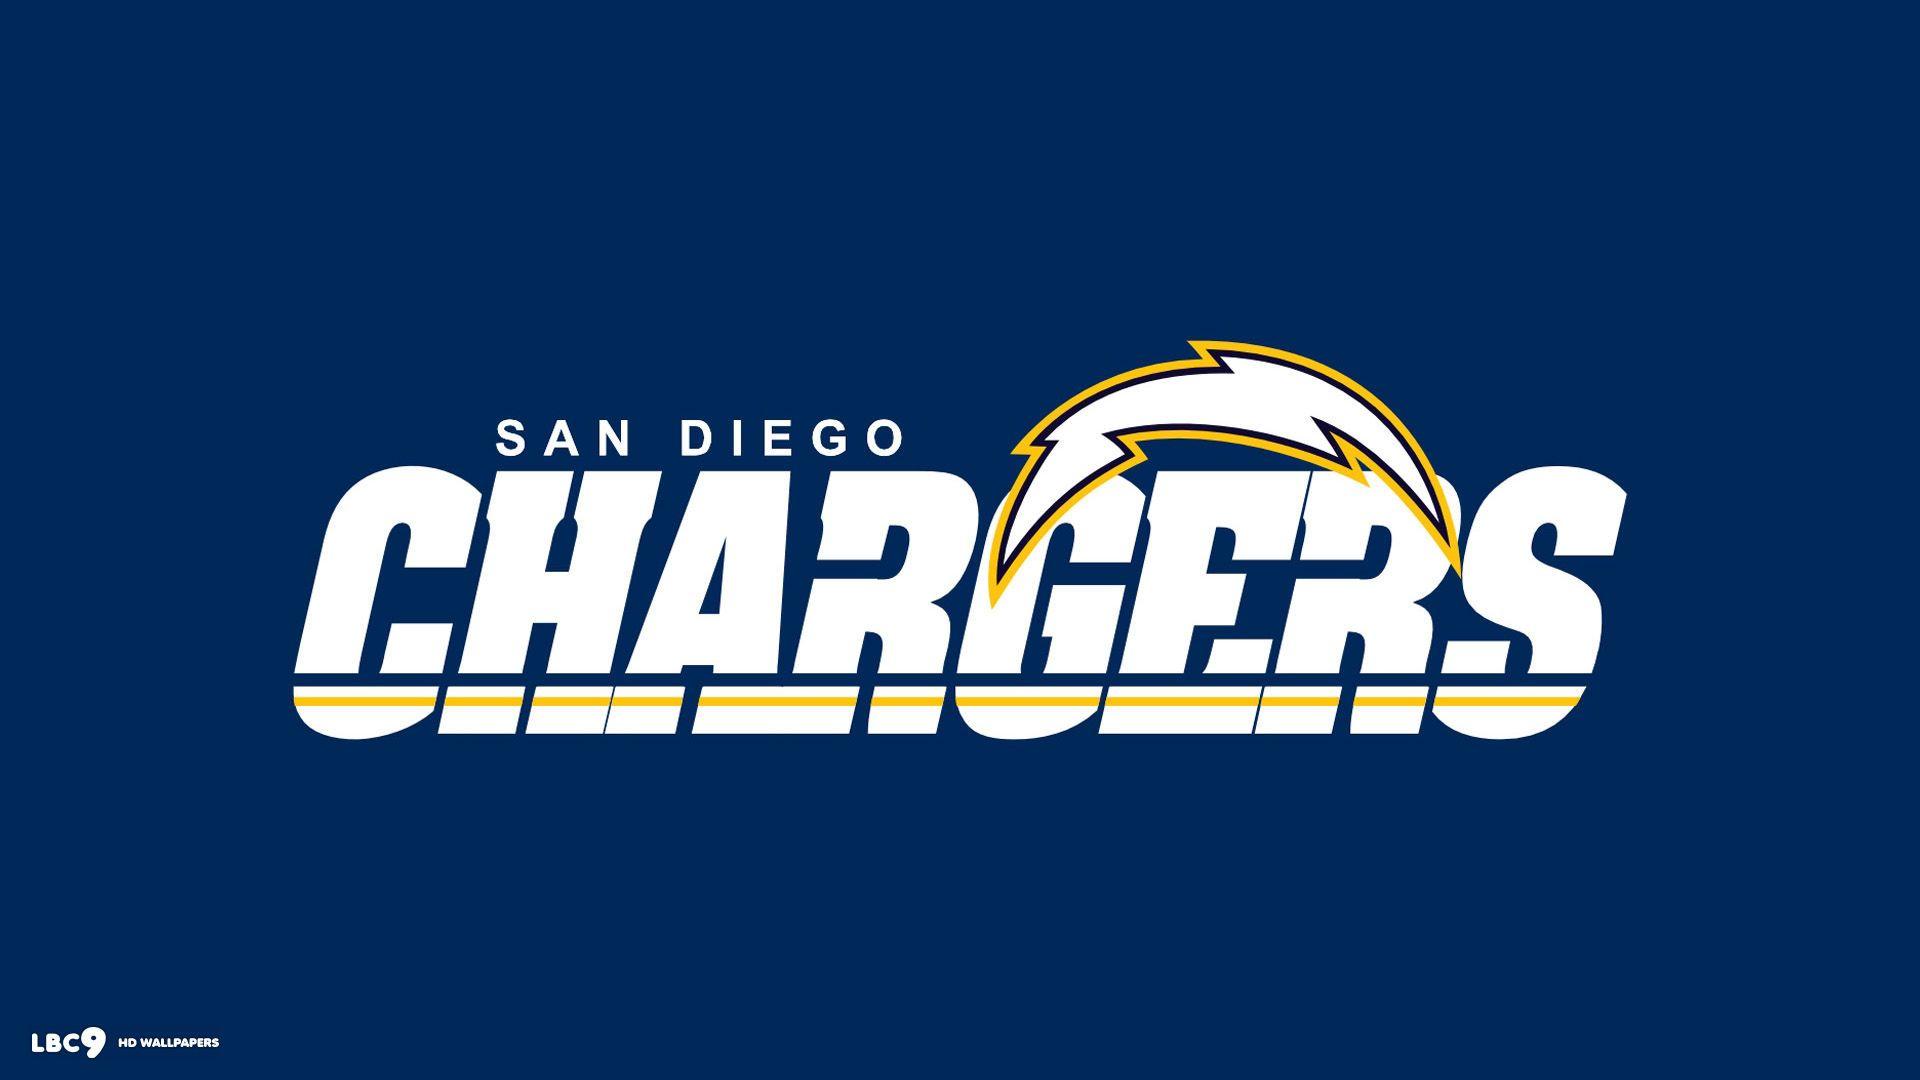 San Diego Chargers Wallpapers Desktop